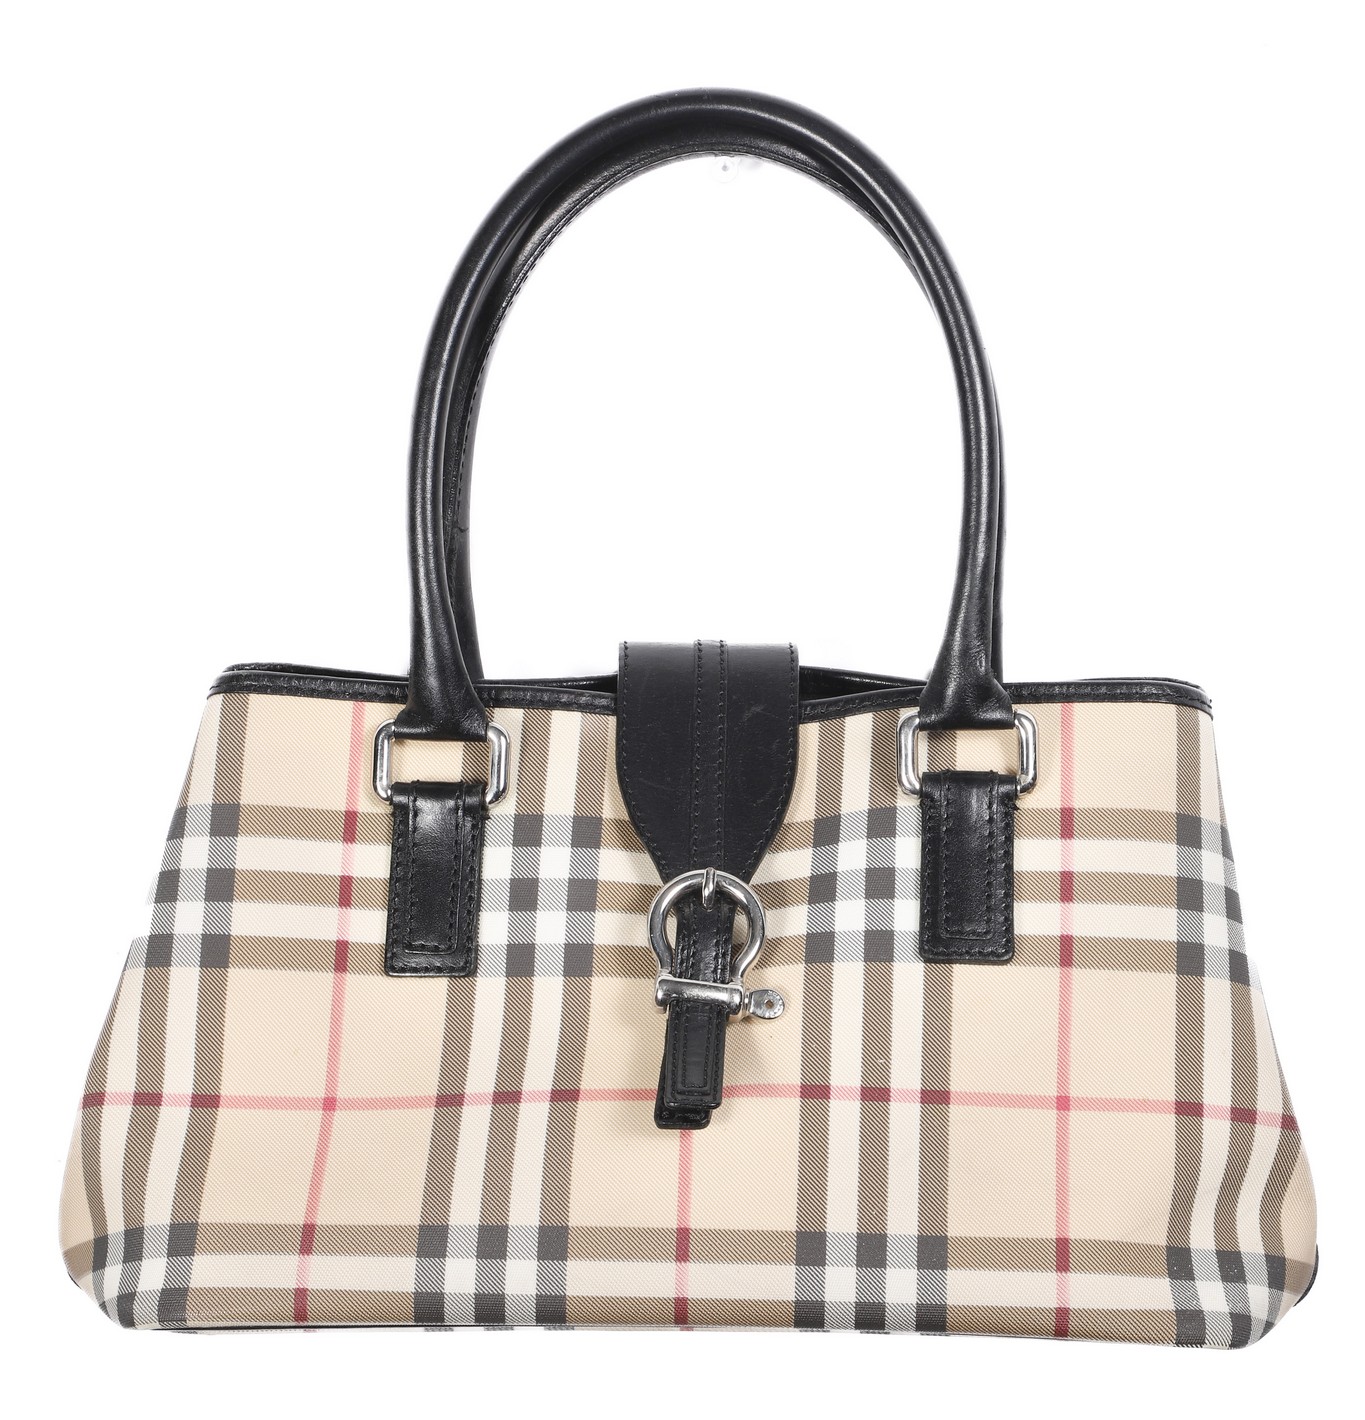 Burberry plaid canvas and leather